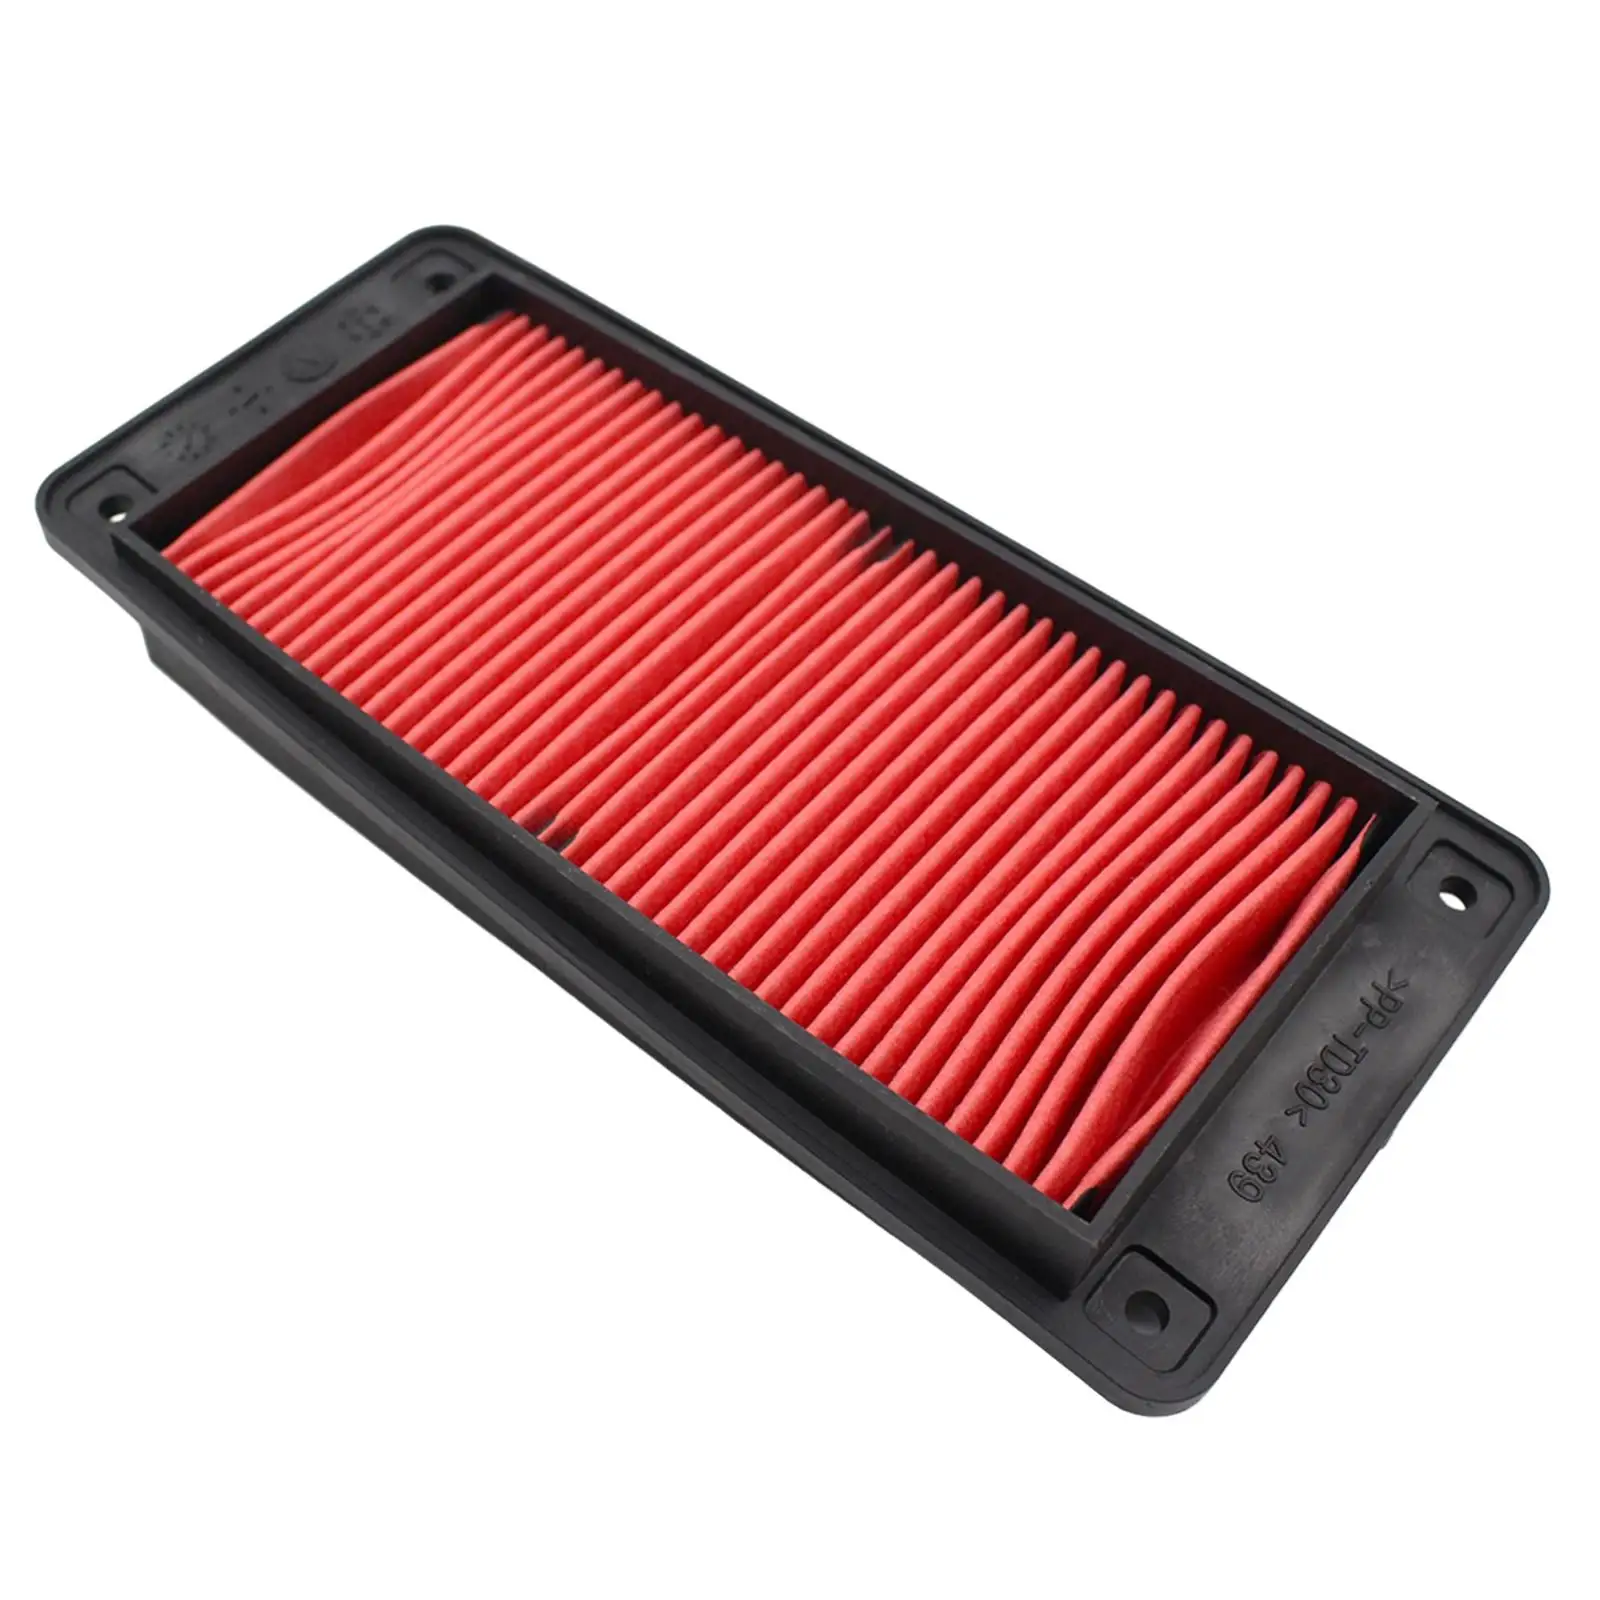  Air Filter Replaces Install Accessory Washable Engine Reusable